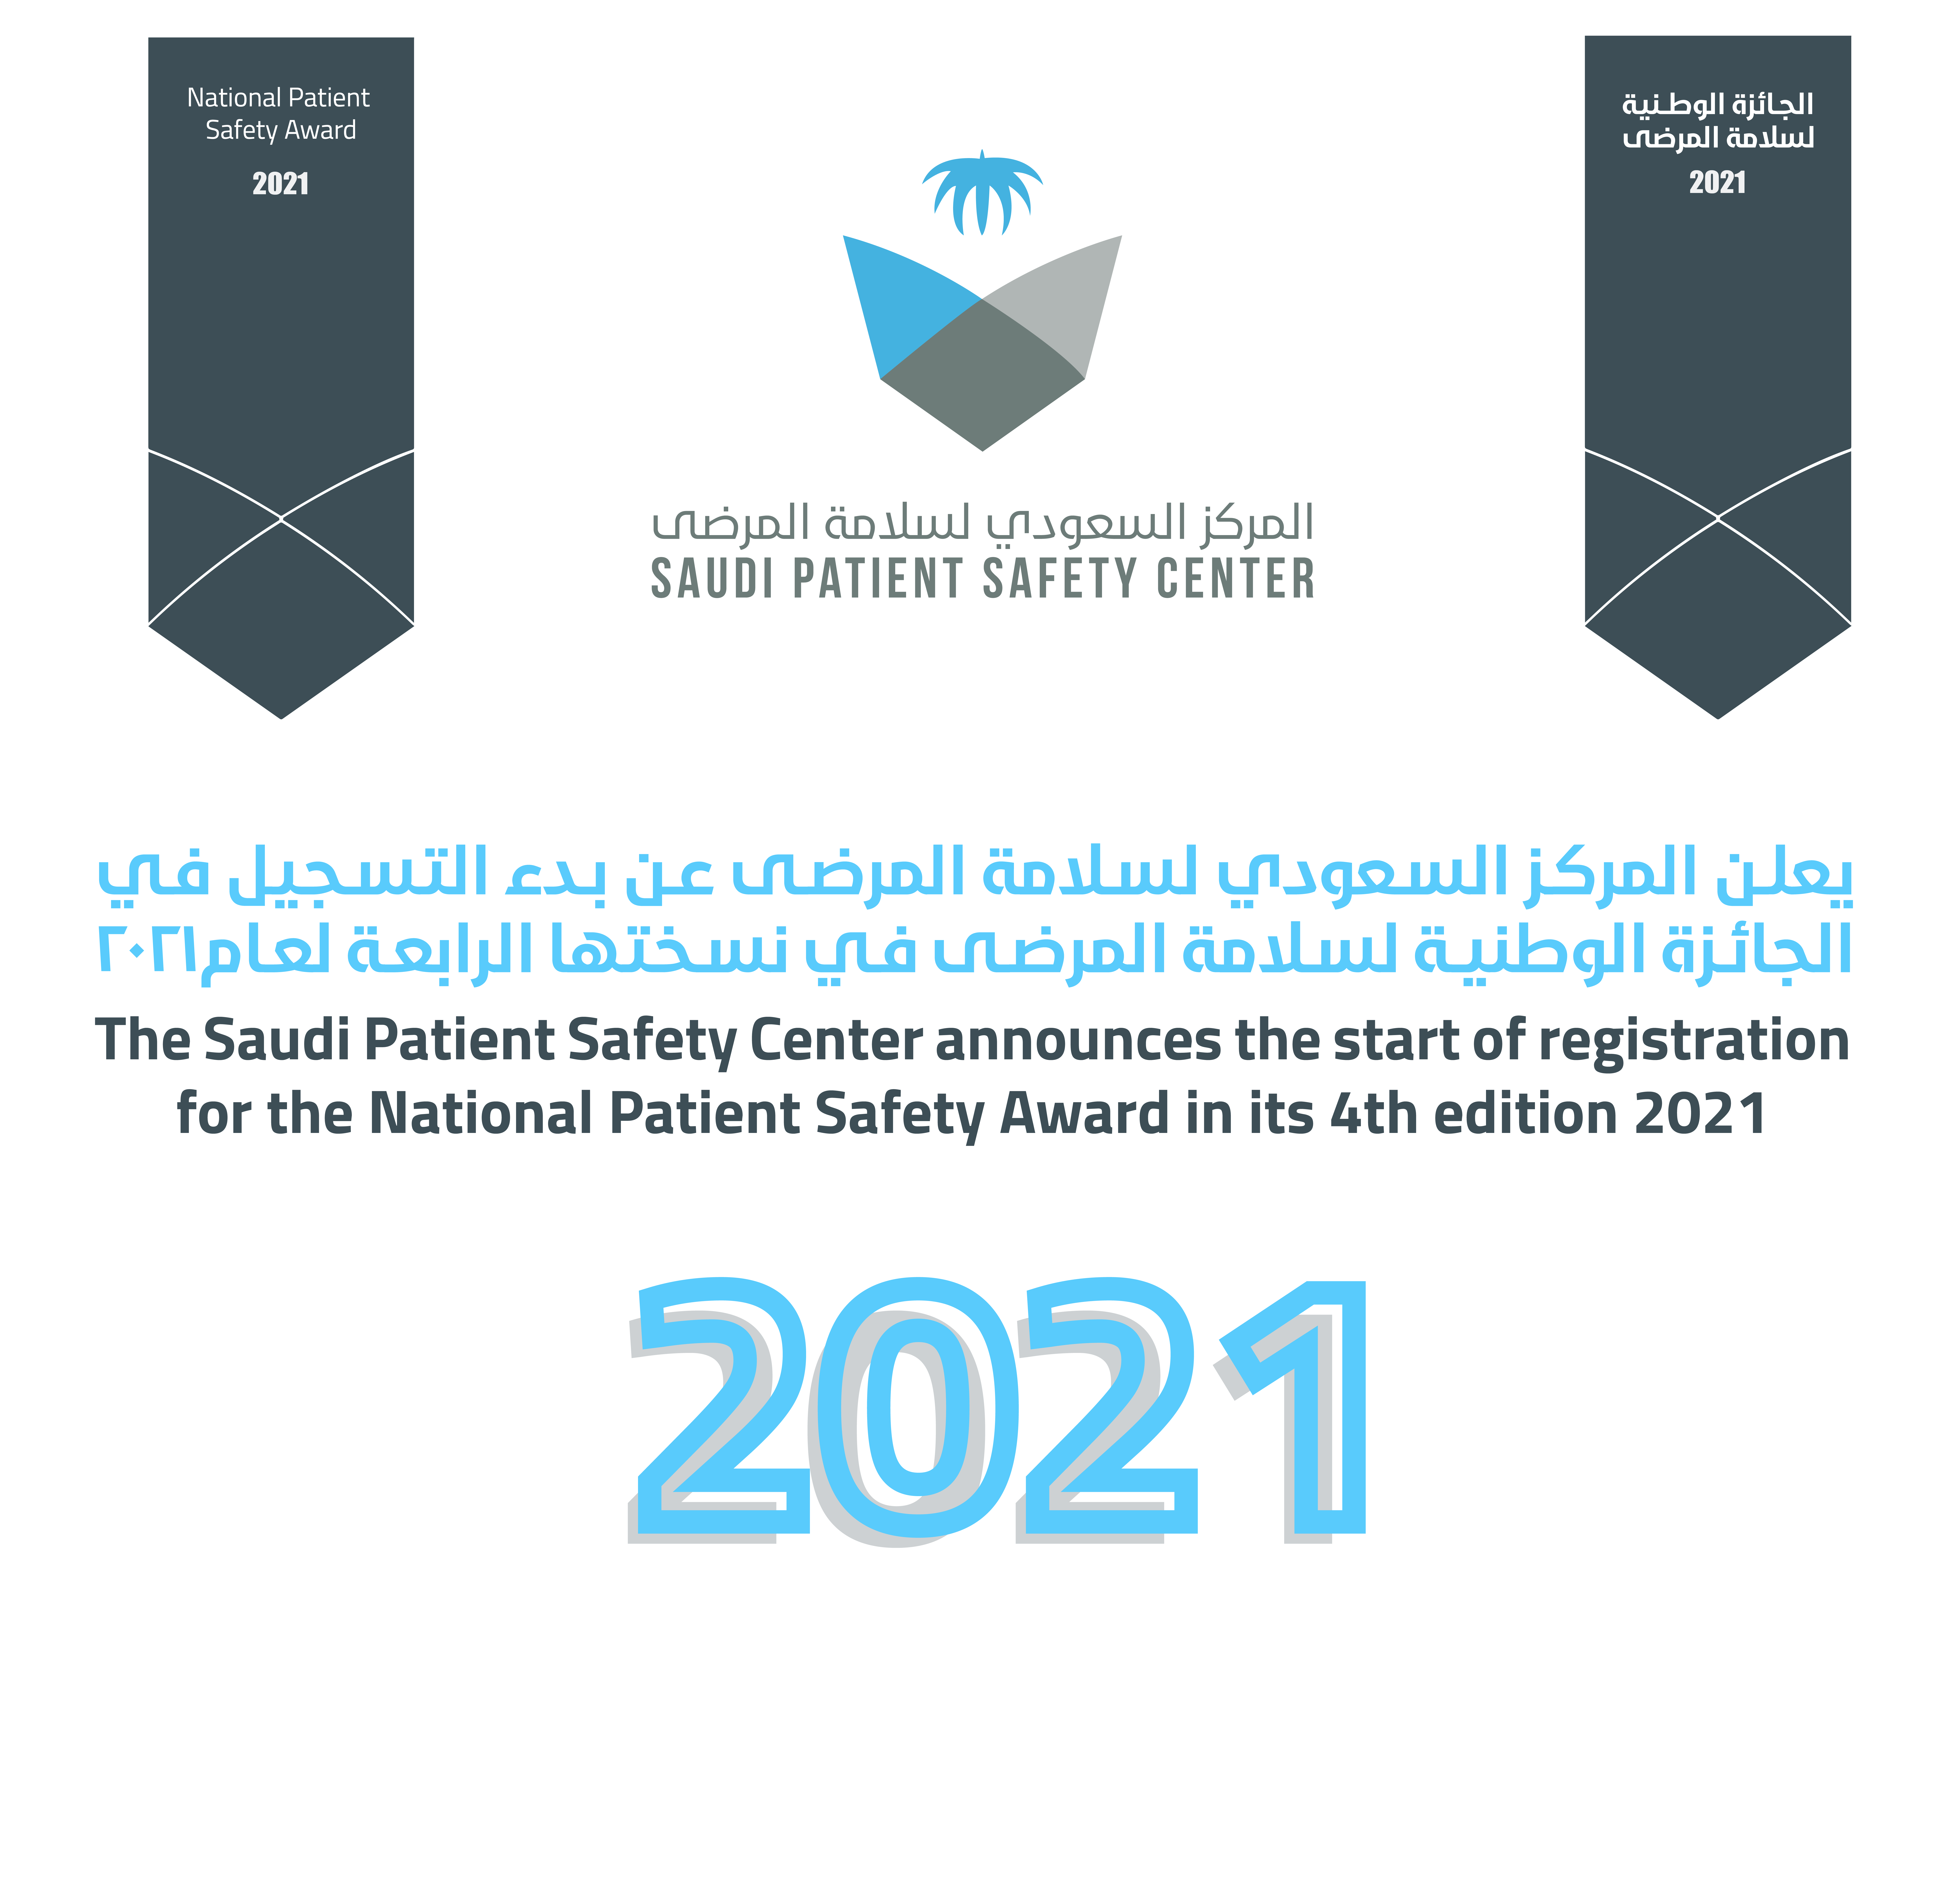 The Saudi Patient Safety Center Announces The Start Of Registration For The National Patient Safety Award In Its 4th Edition 2021